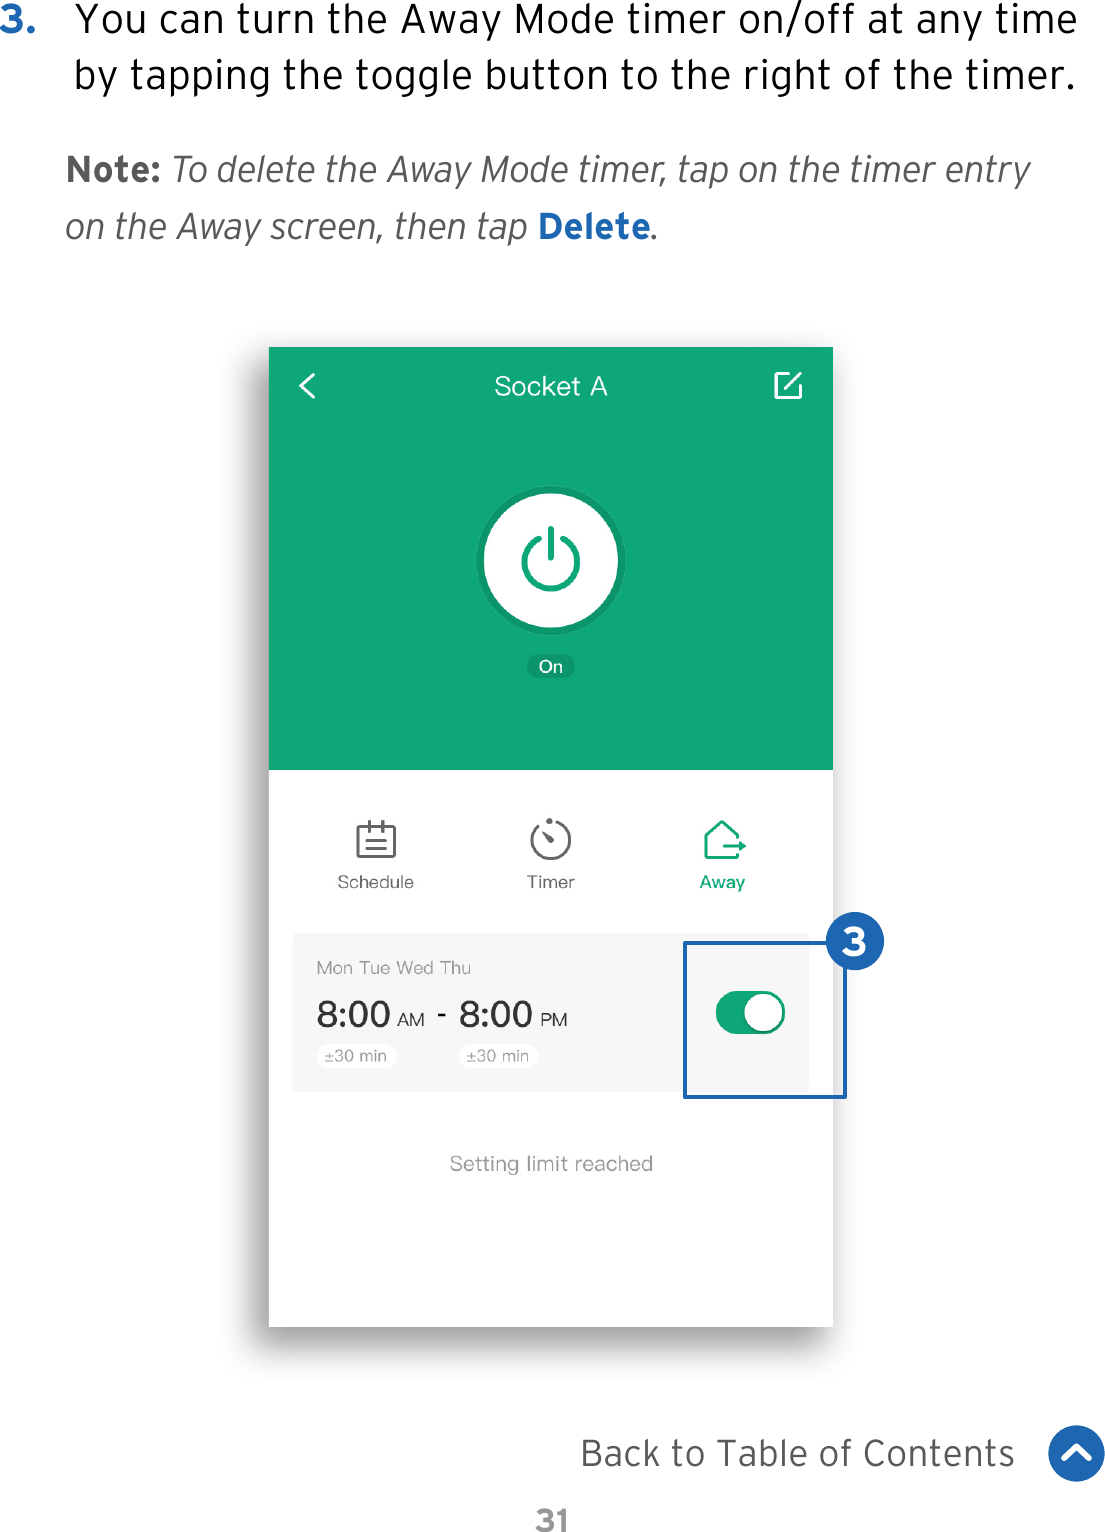 313.  You can turn the Away Mode timer on/off at any time by tapping the toggle button to the right of the timer.3Back to Table of ContentsNote: To delete the Away Mode timer, tap on the timer entry on the Away screen, then tap Delete.